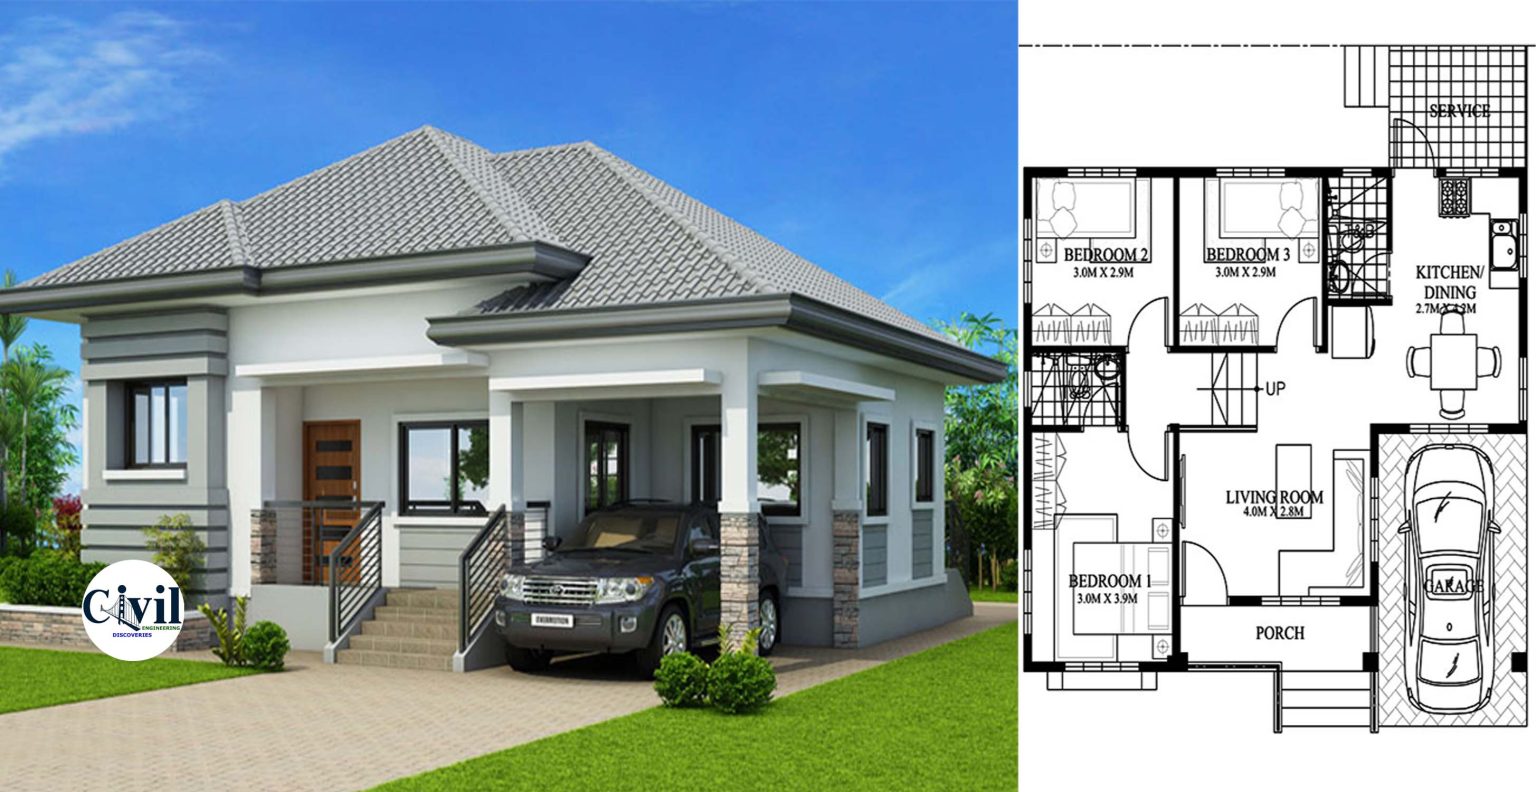 Modern Bungalow House Design With Three Bedrooms | Engineering Discoveries